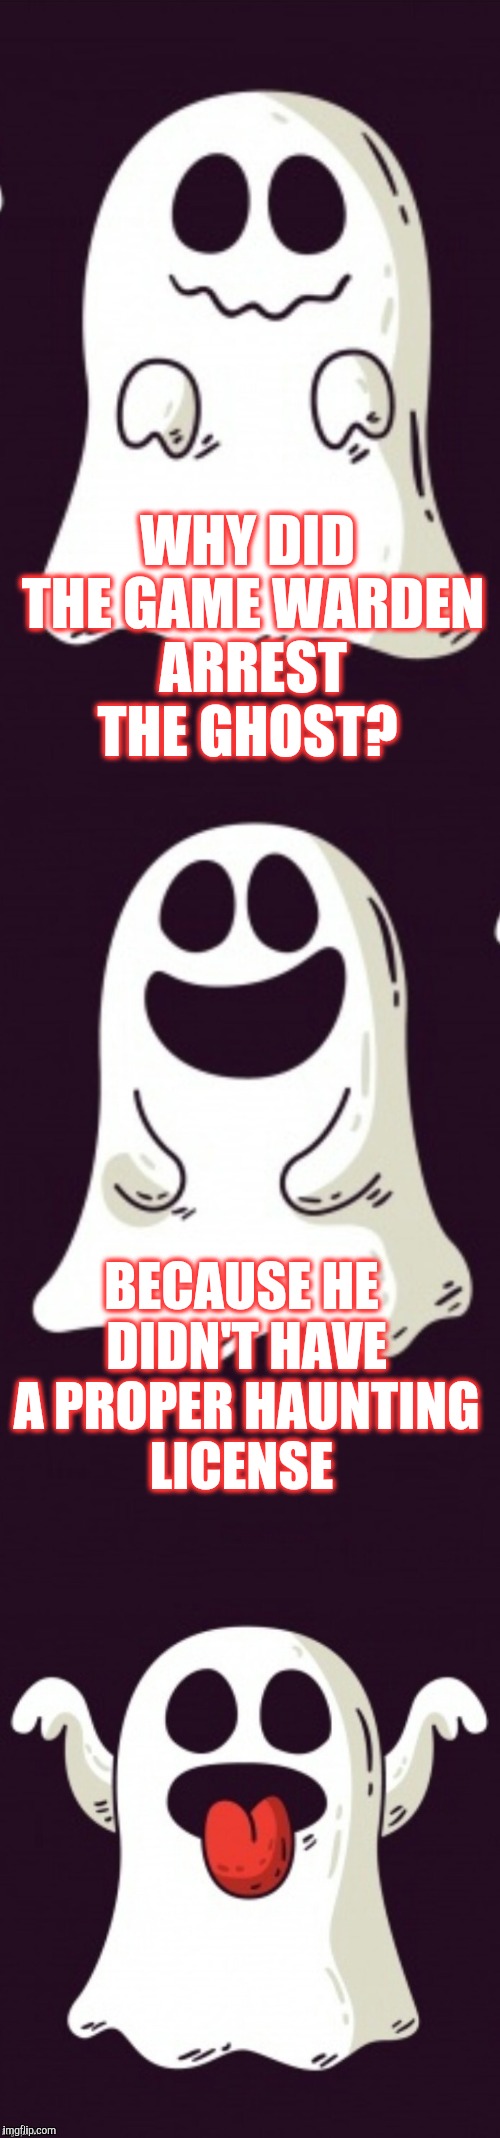  Ghost Week, Jan. 21-27, A LaurynFlint Event! | WHY DID THE GAME WARDEN ARREST THE GHOST? BECAUSE HE DIDN'T HAVE A PROPER HAUNTING LICENSE | image tagged in ghost joke template,jbmemegeek,ghost week,bad puns,ghosts | made w/ Imgflip meme maker